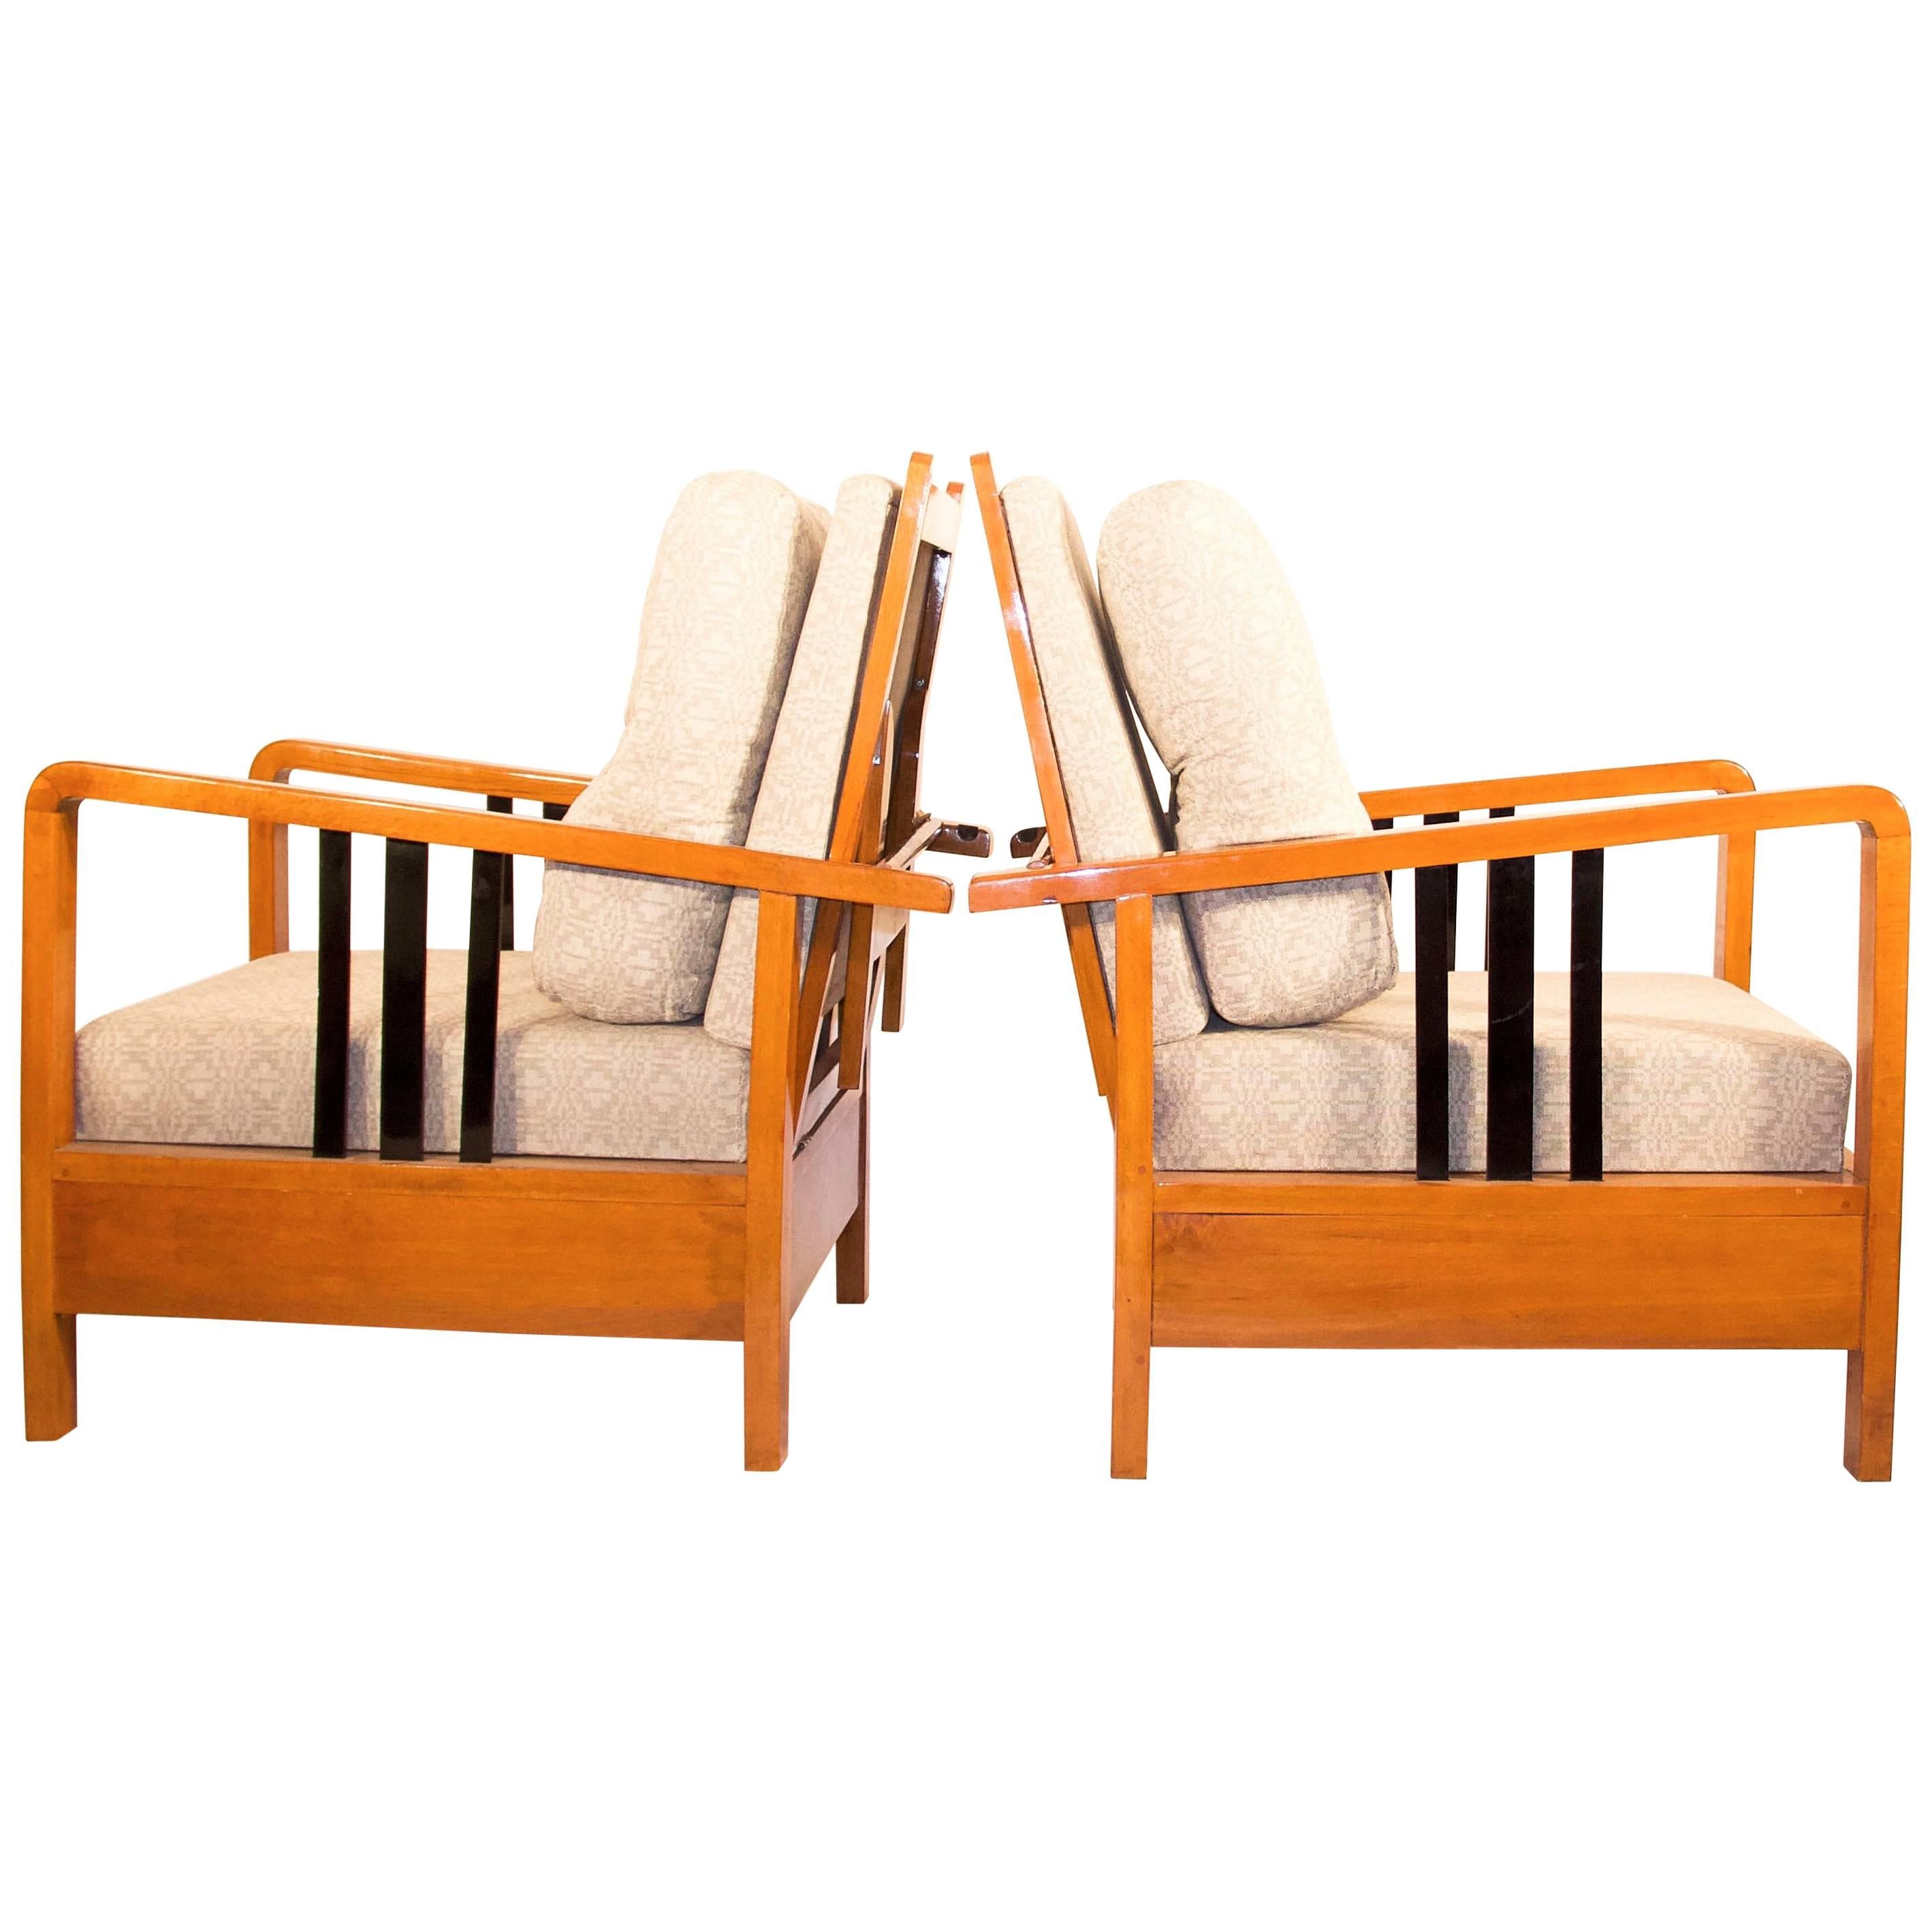 Rare, Kozma Lajos Art Deco Lounge Chair from the 1930s For Sale